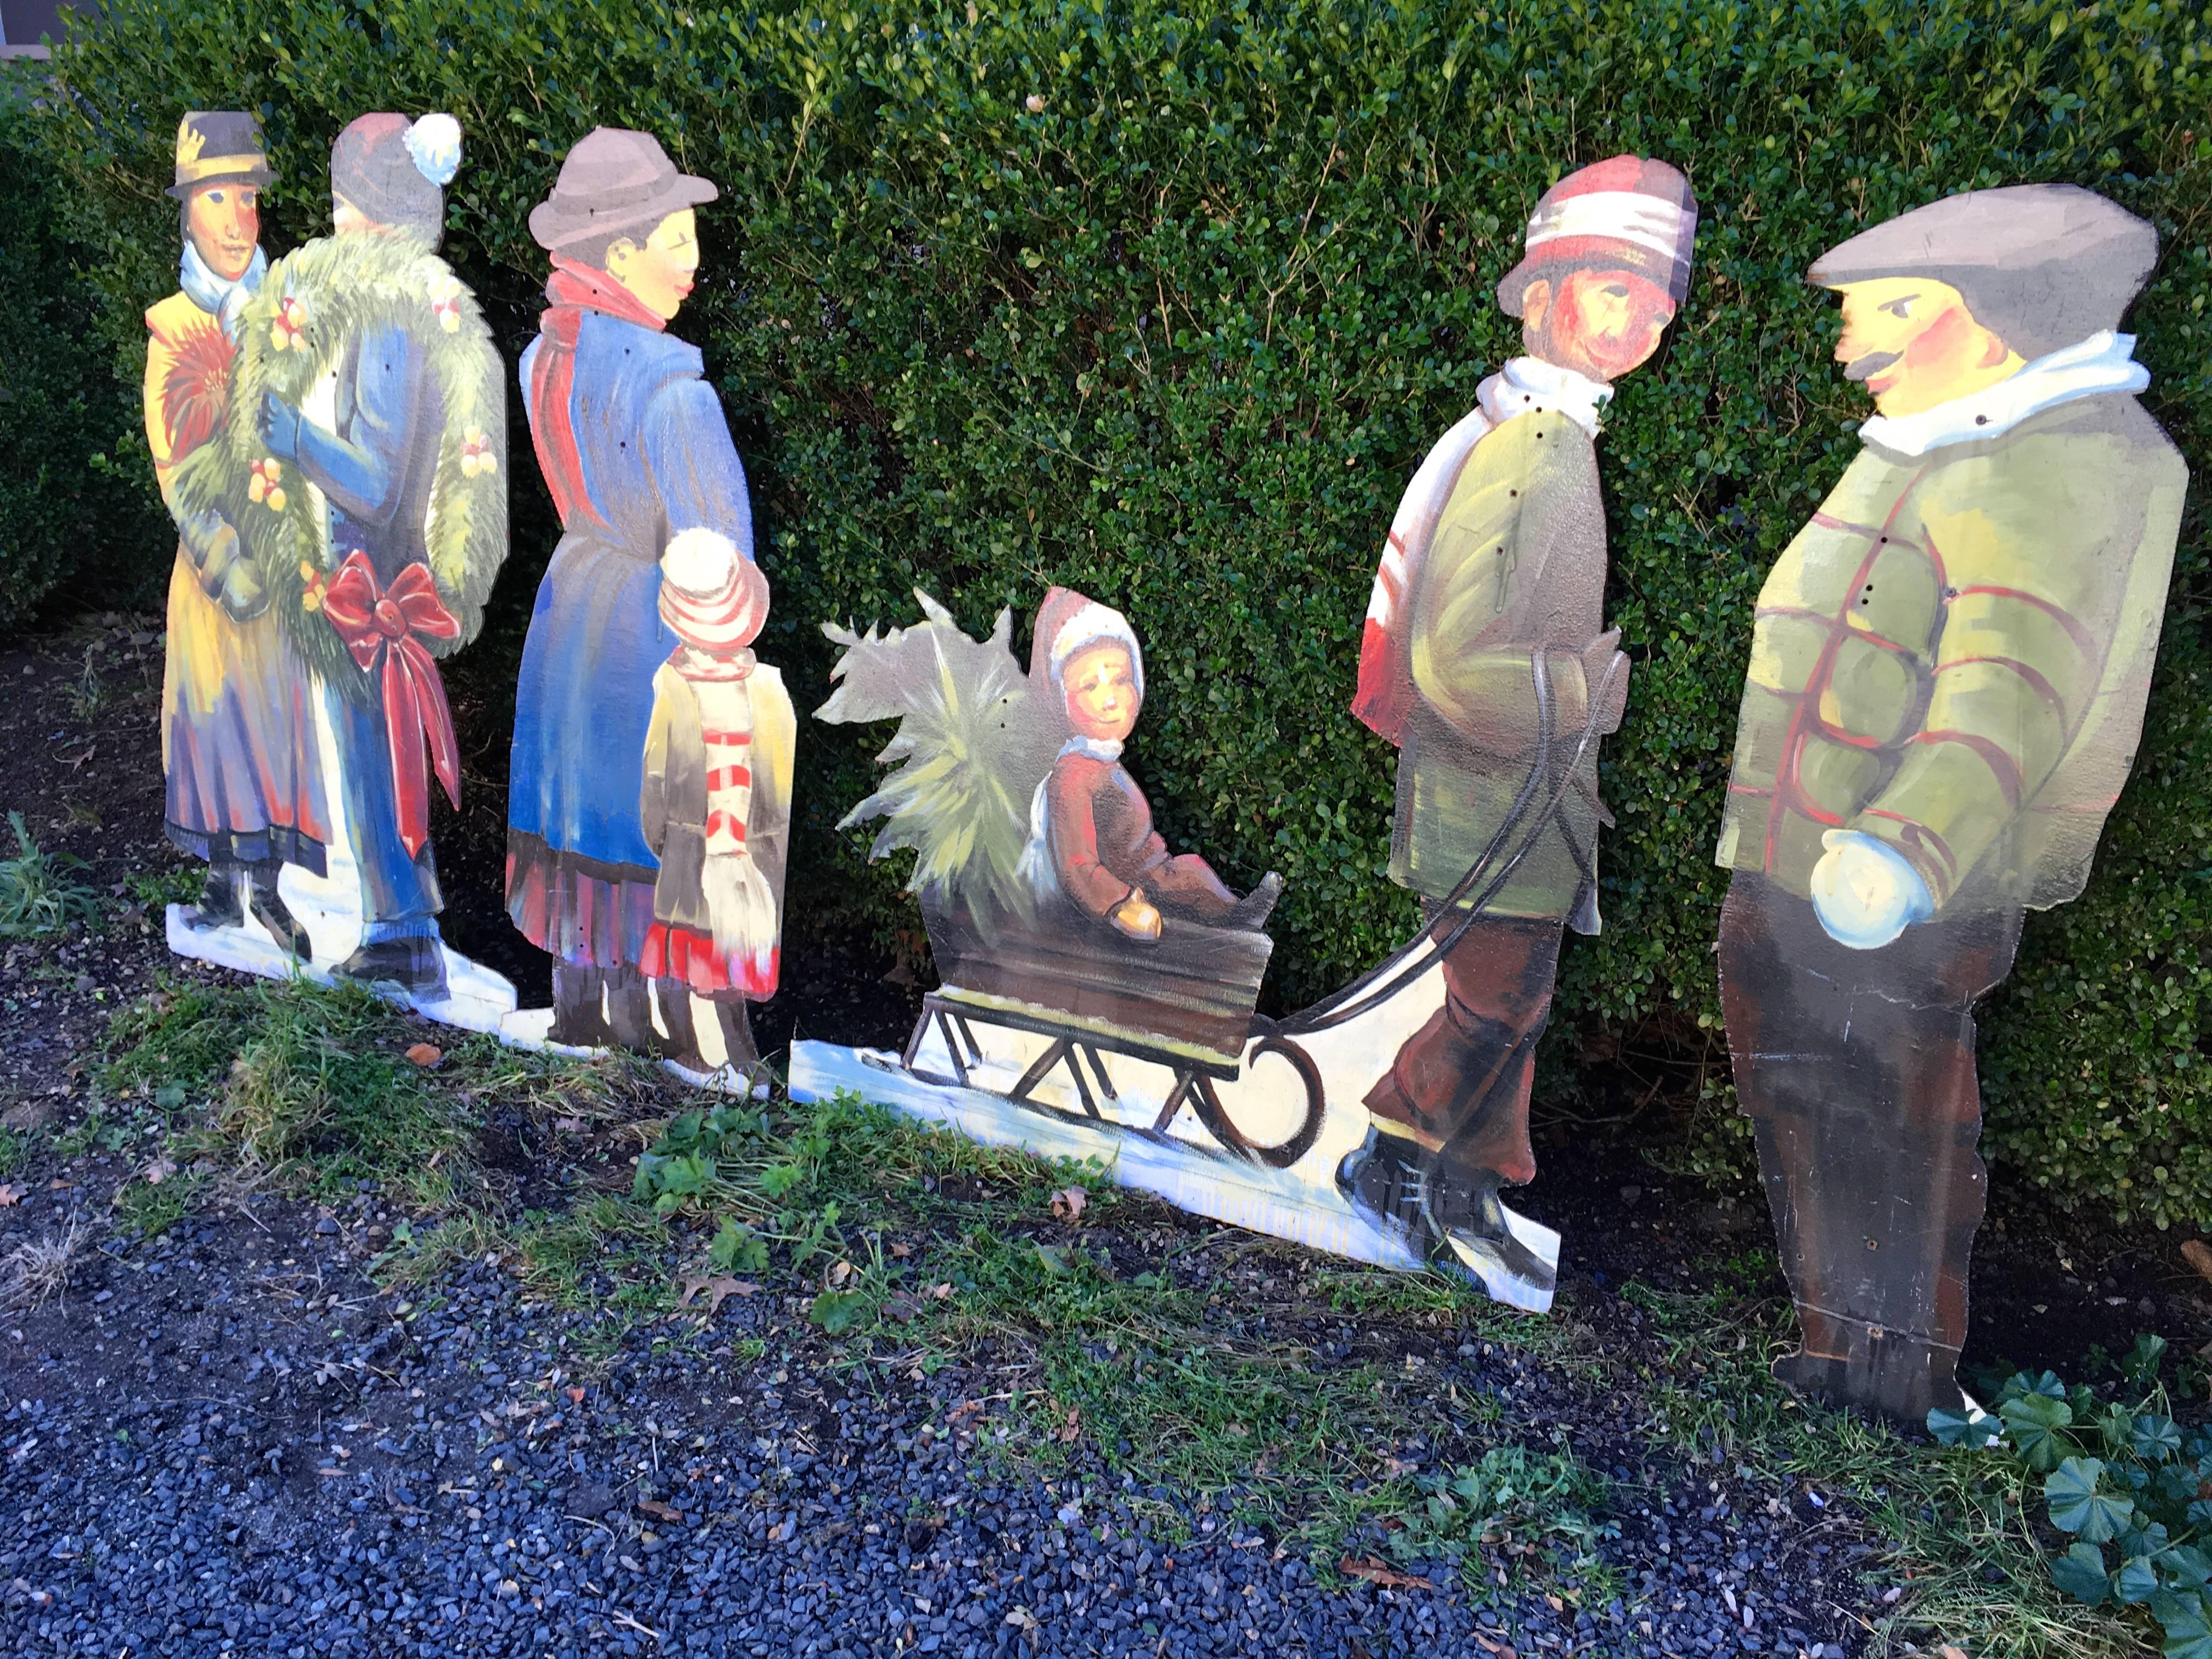 This collection of four hand-painted, large holiday figures on plywood depicting a group of villagers preparing for Christmas is rare and choice. The painting is extremely skilled, very colorful and the style of the figures is turn-of-the-century